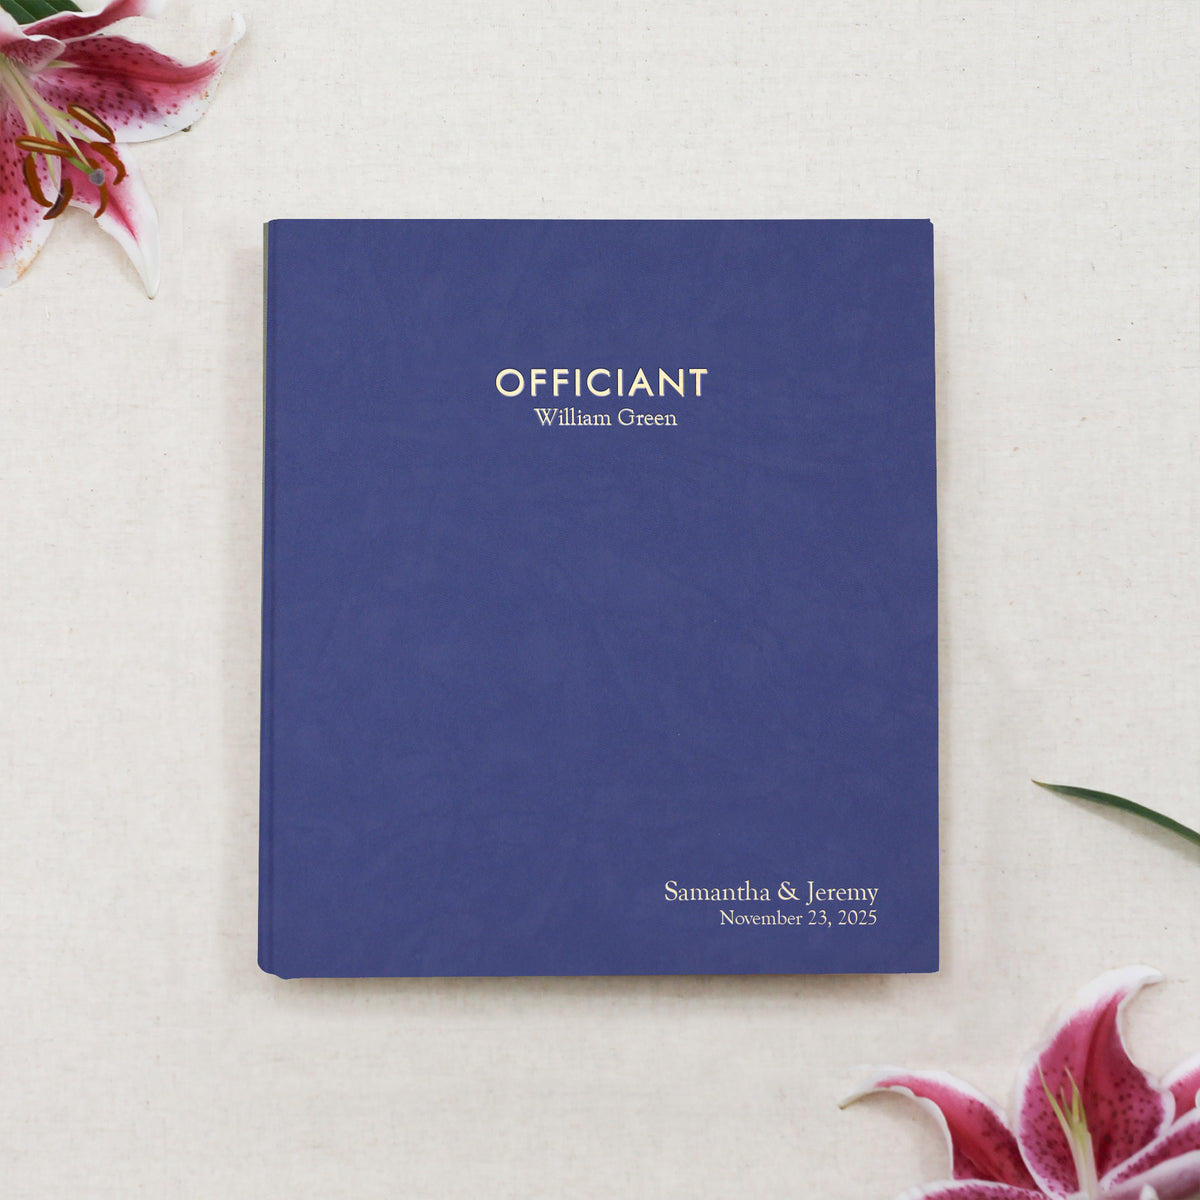 Officiant Binder | Cover: Indigo Vegan Leather | Available Personalized